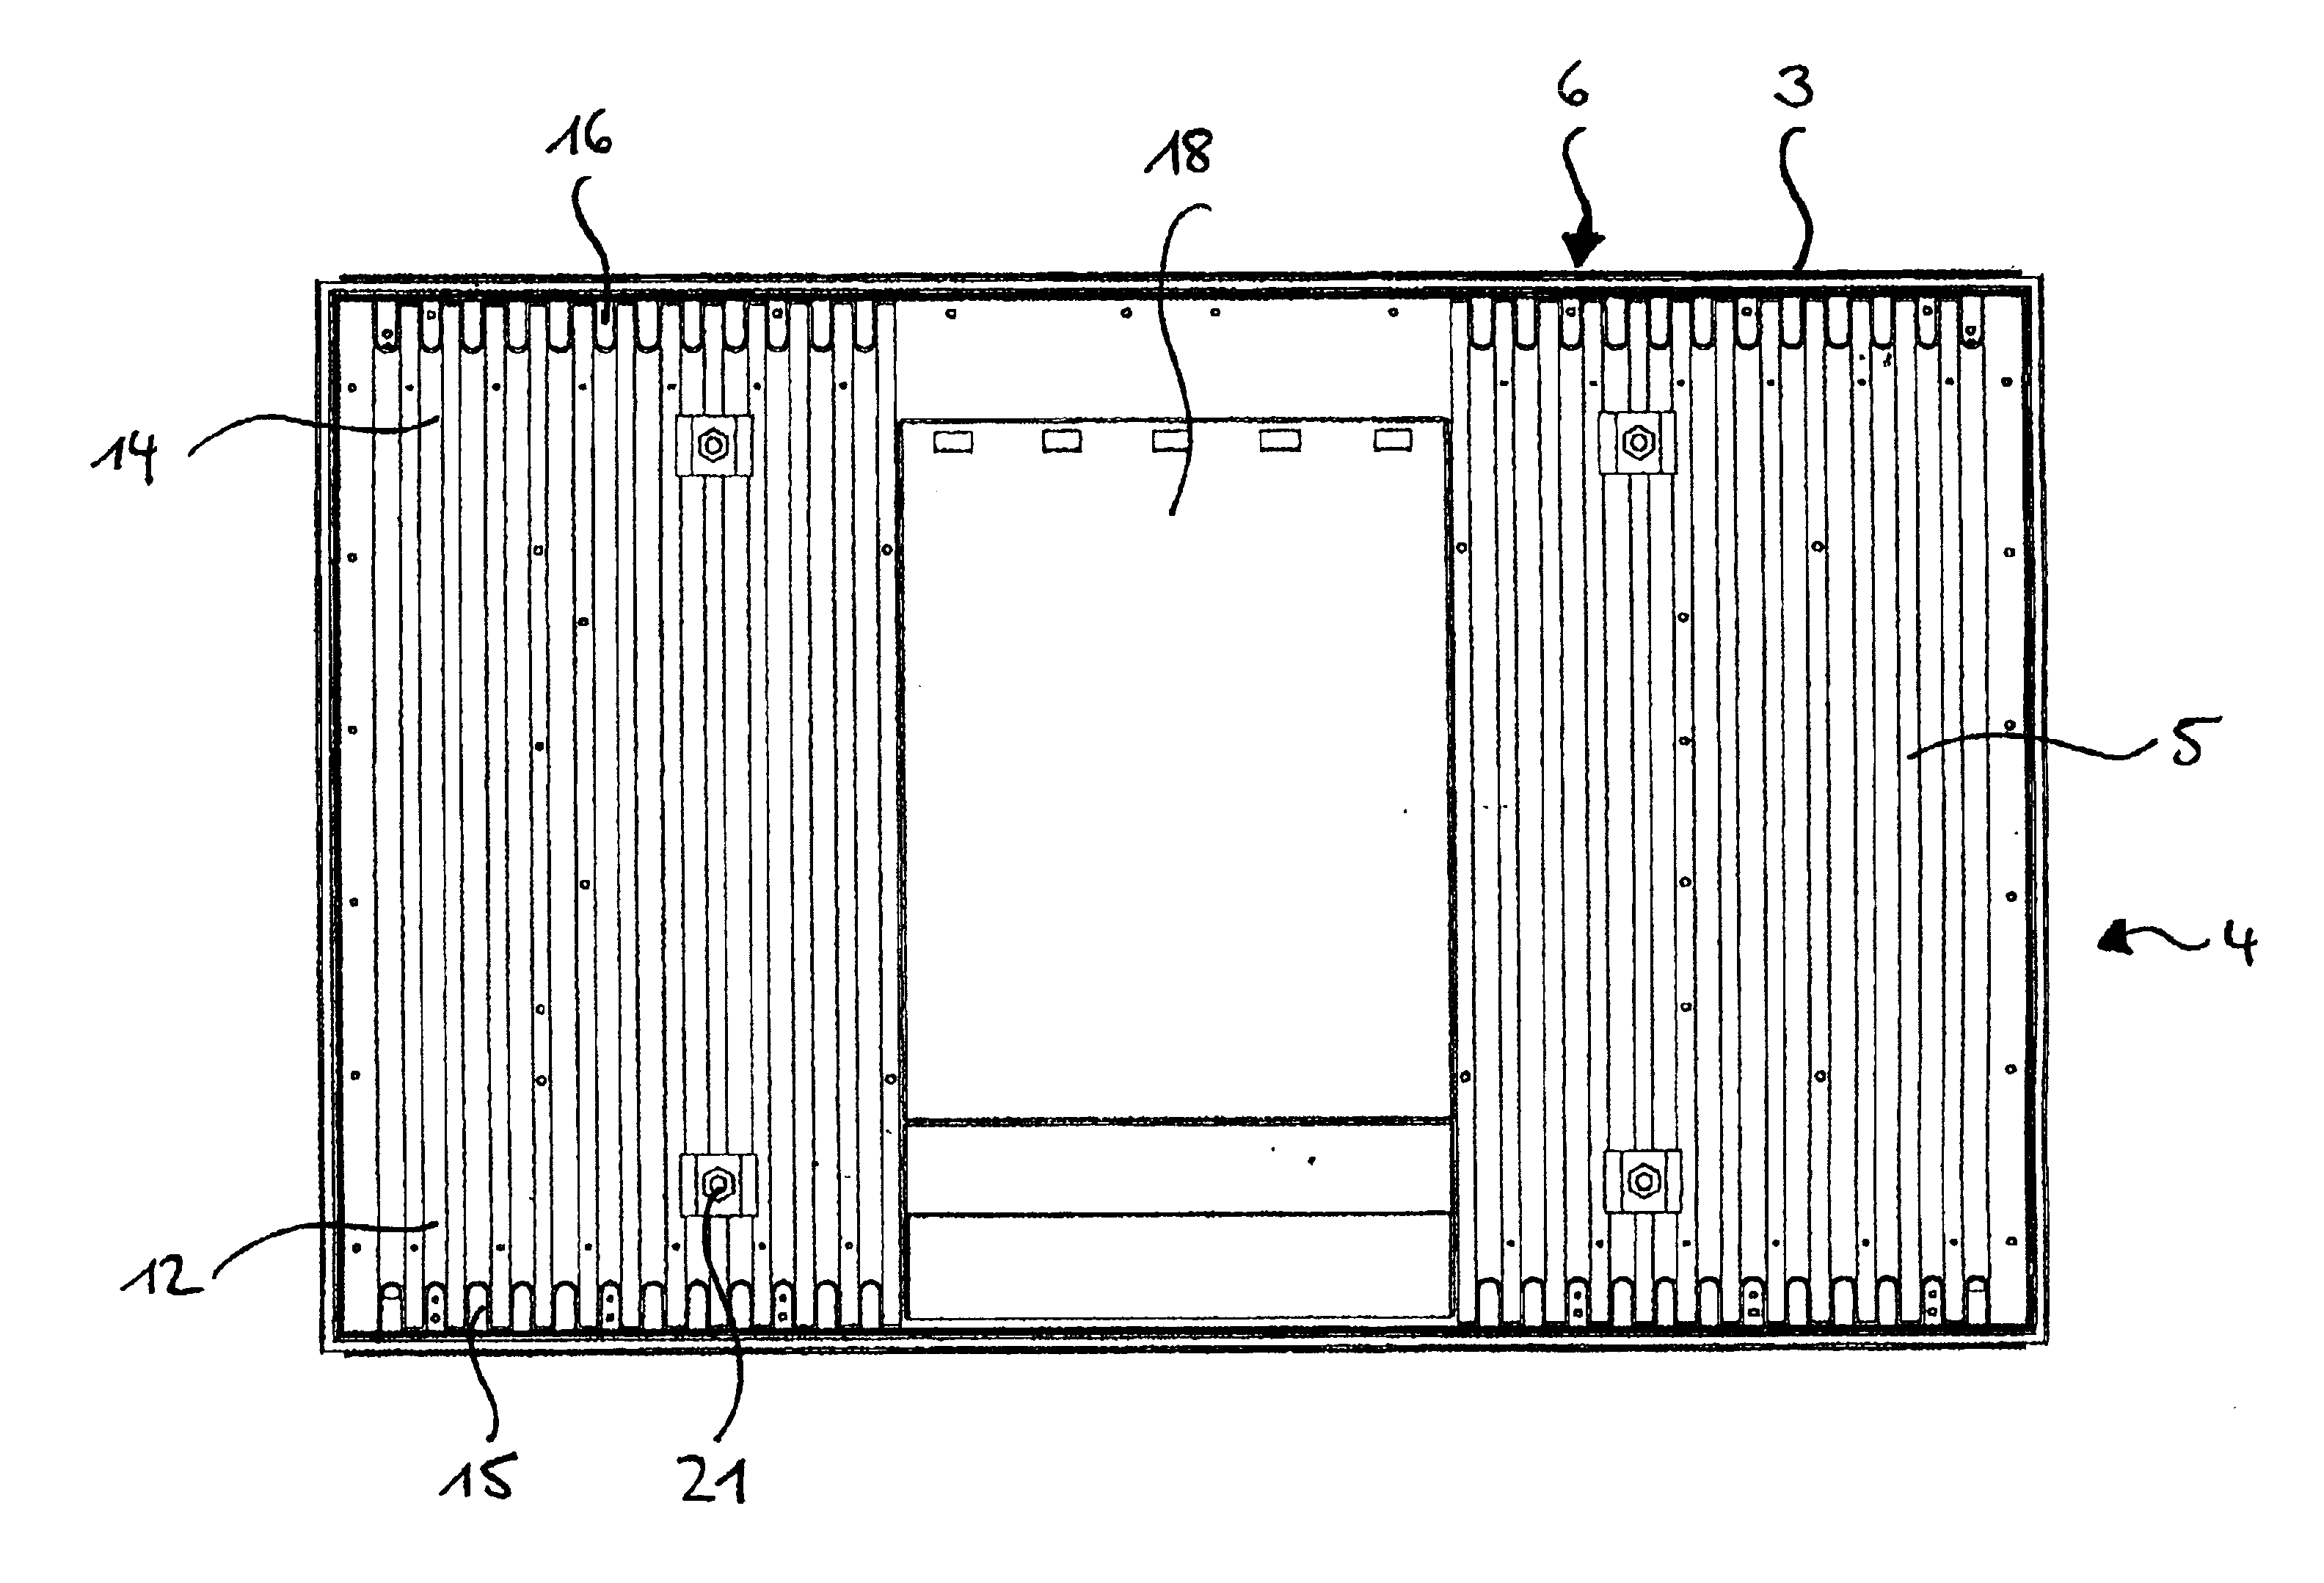 Apparatus for mounting and cooling a flat screen